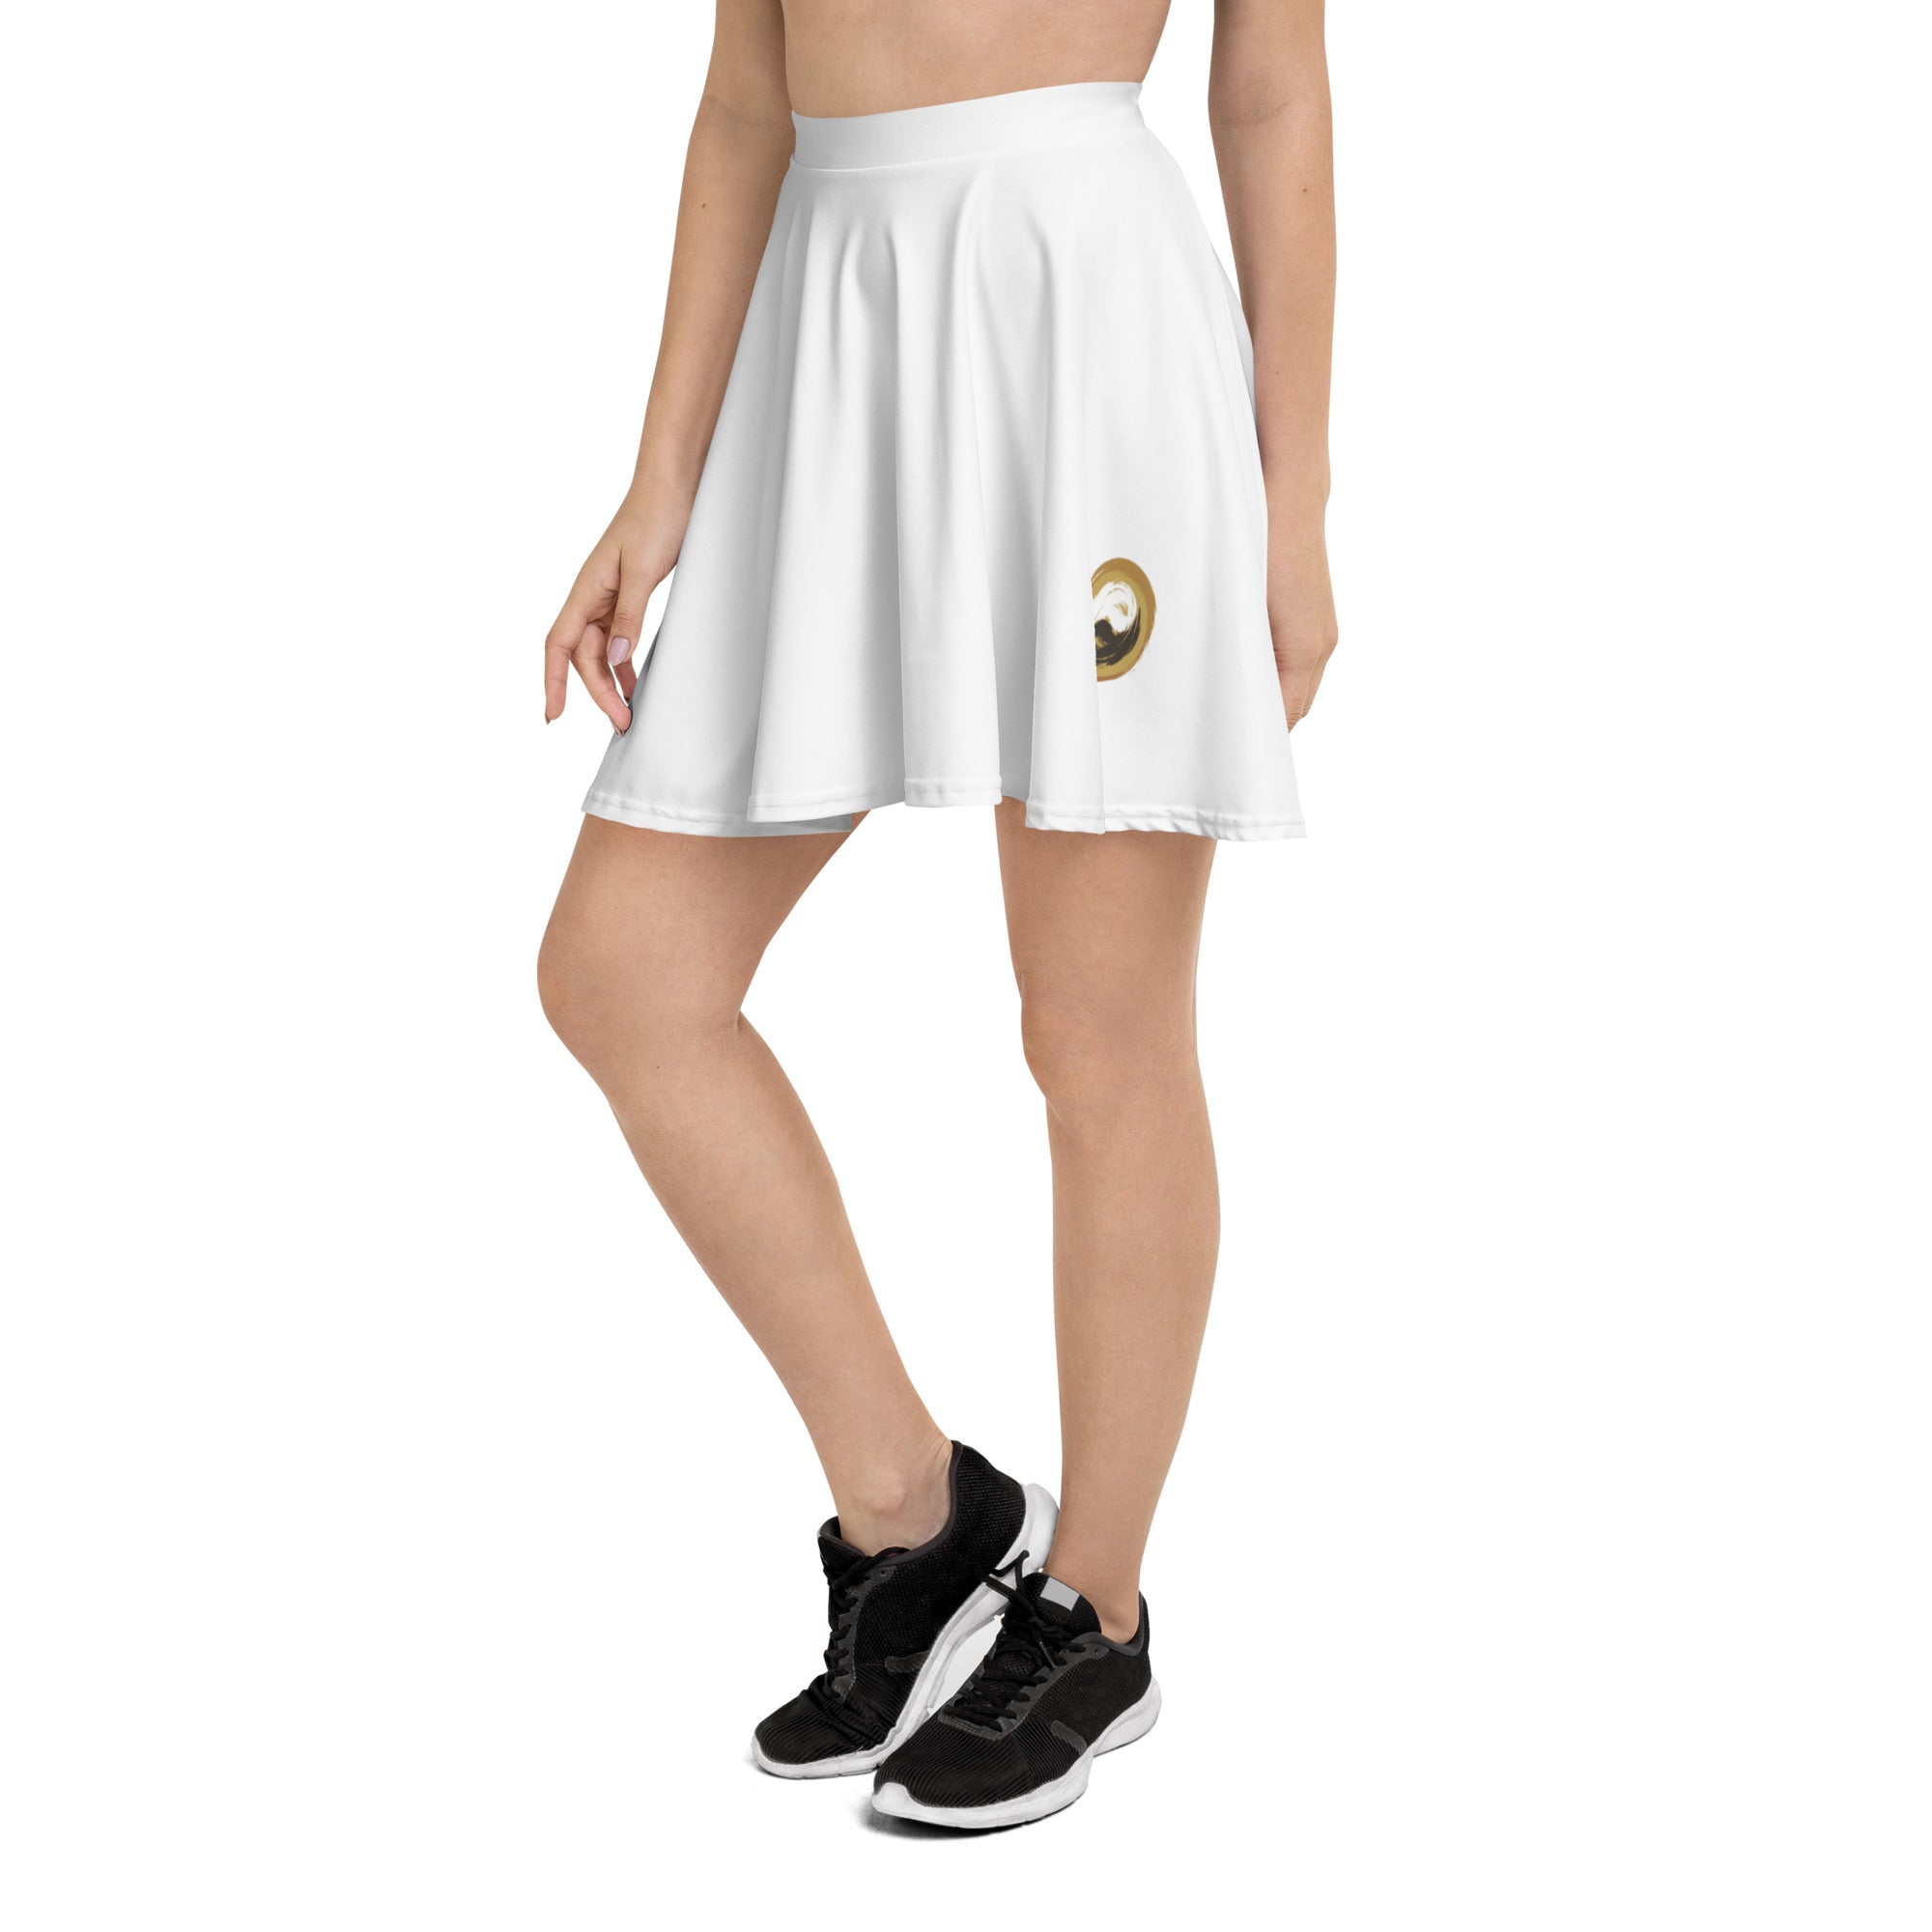 Skater Skirt - Personal Hour for Yoga and Meditations 